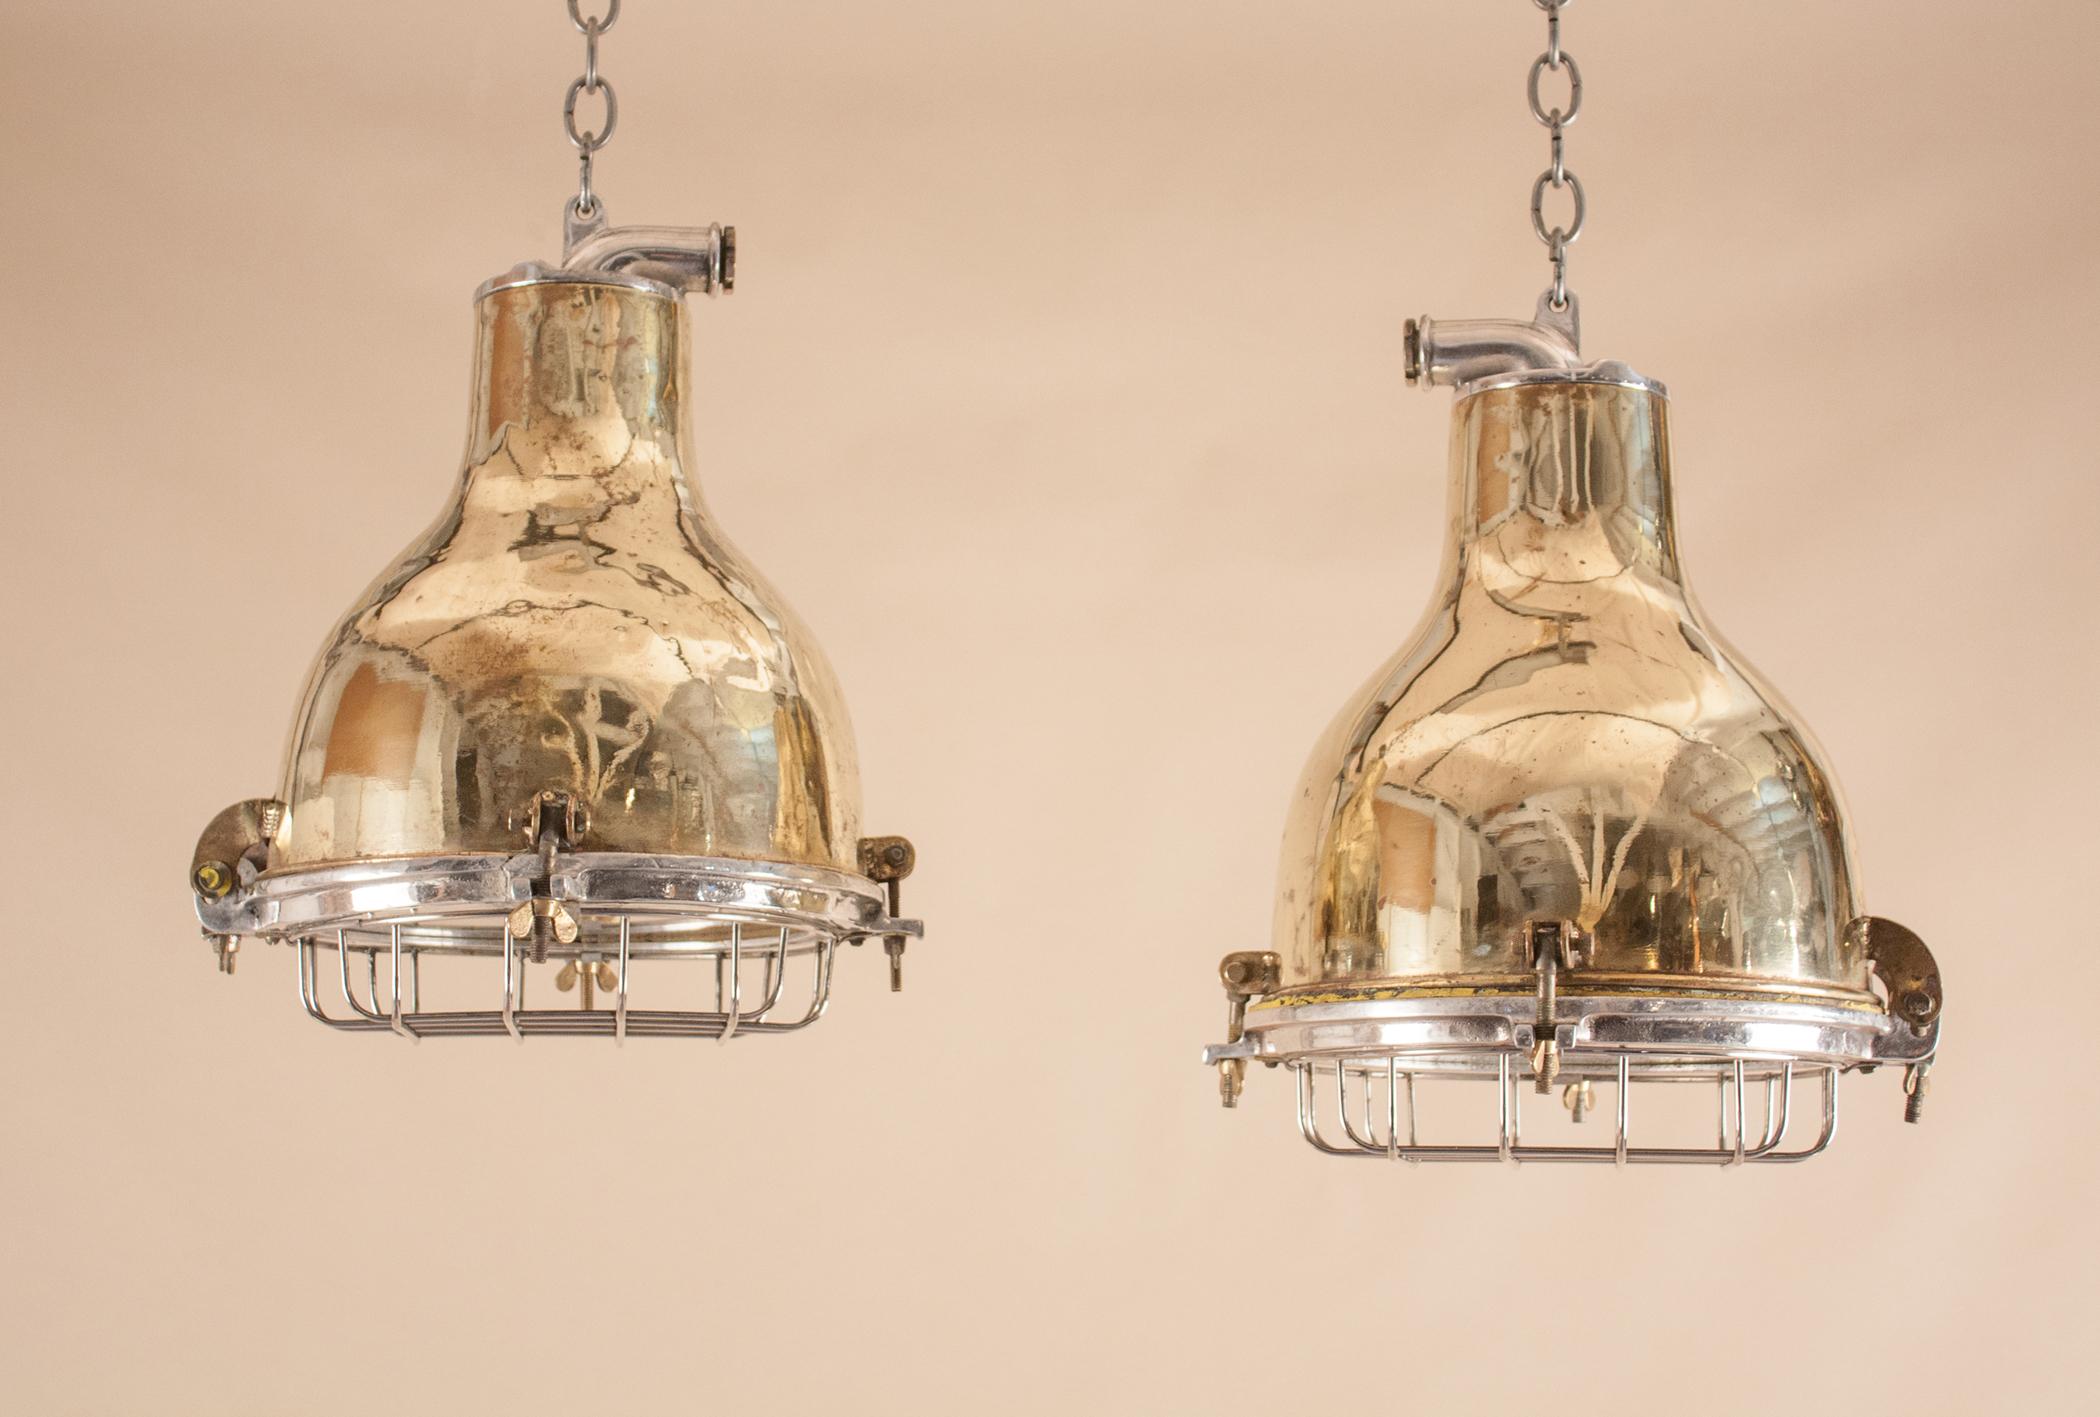 An attentively restored pair of industrial maritime pendants with an appealing brass patina and traces of original paint. Optional, and a matter of preference, these circa 1950 brass spotlights can be used with or without the protective cast